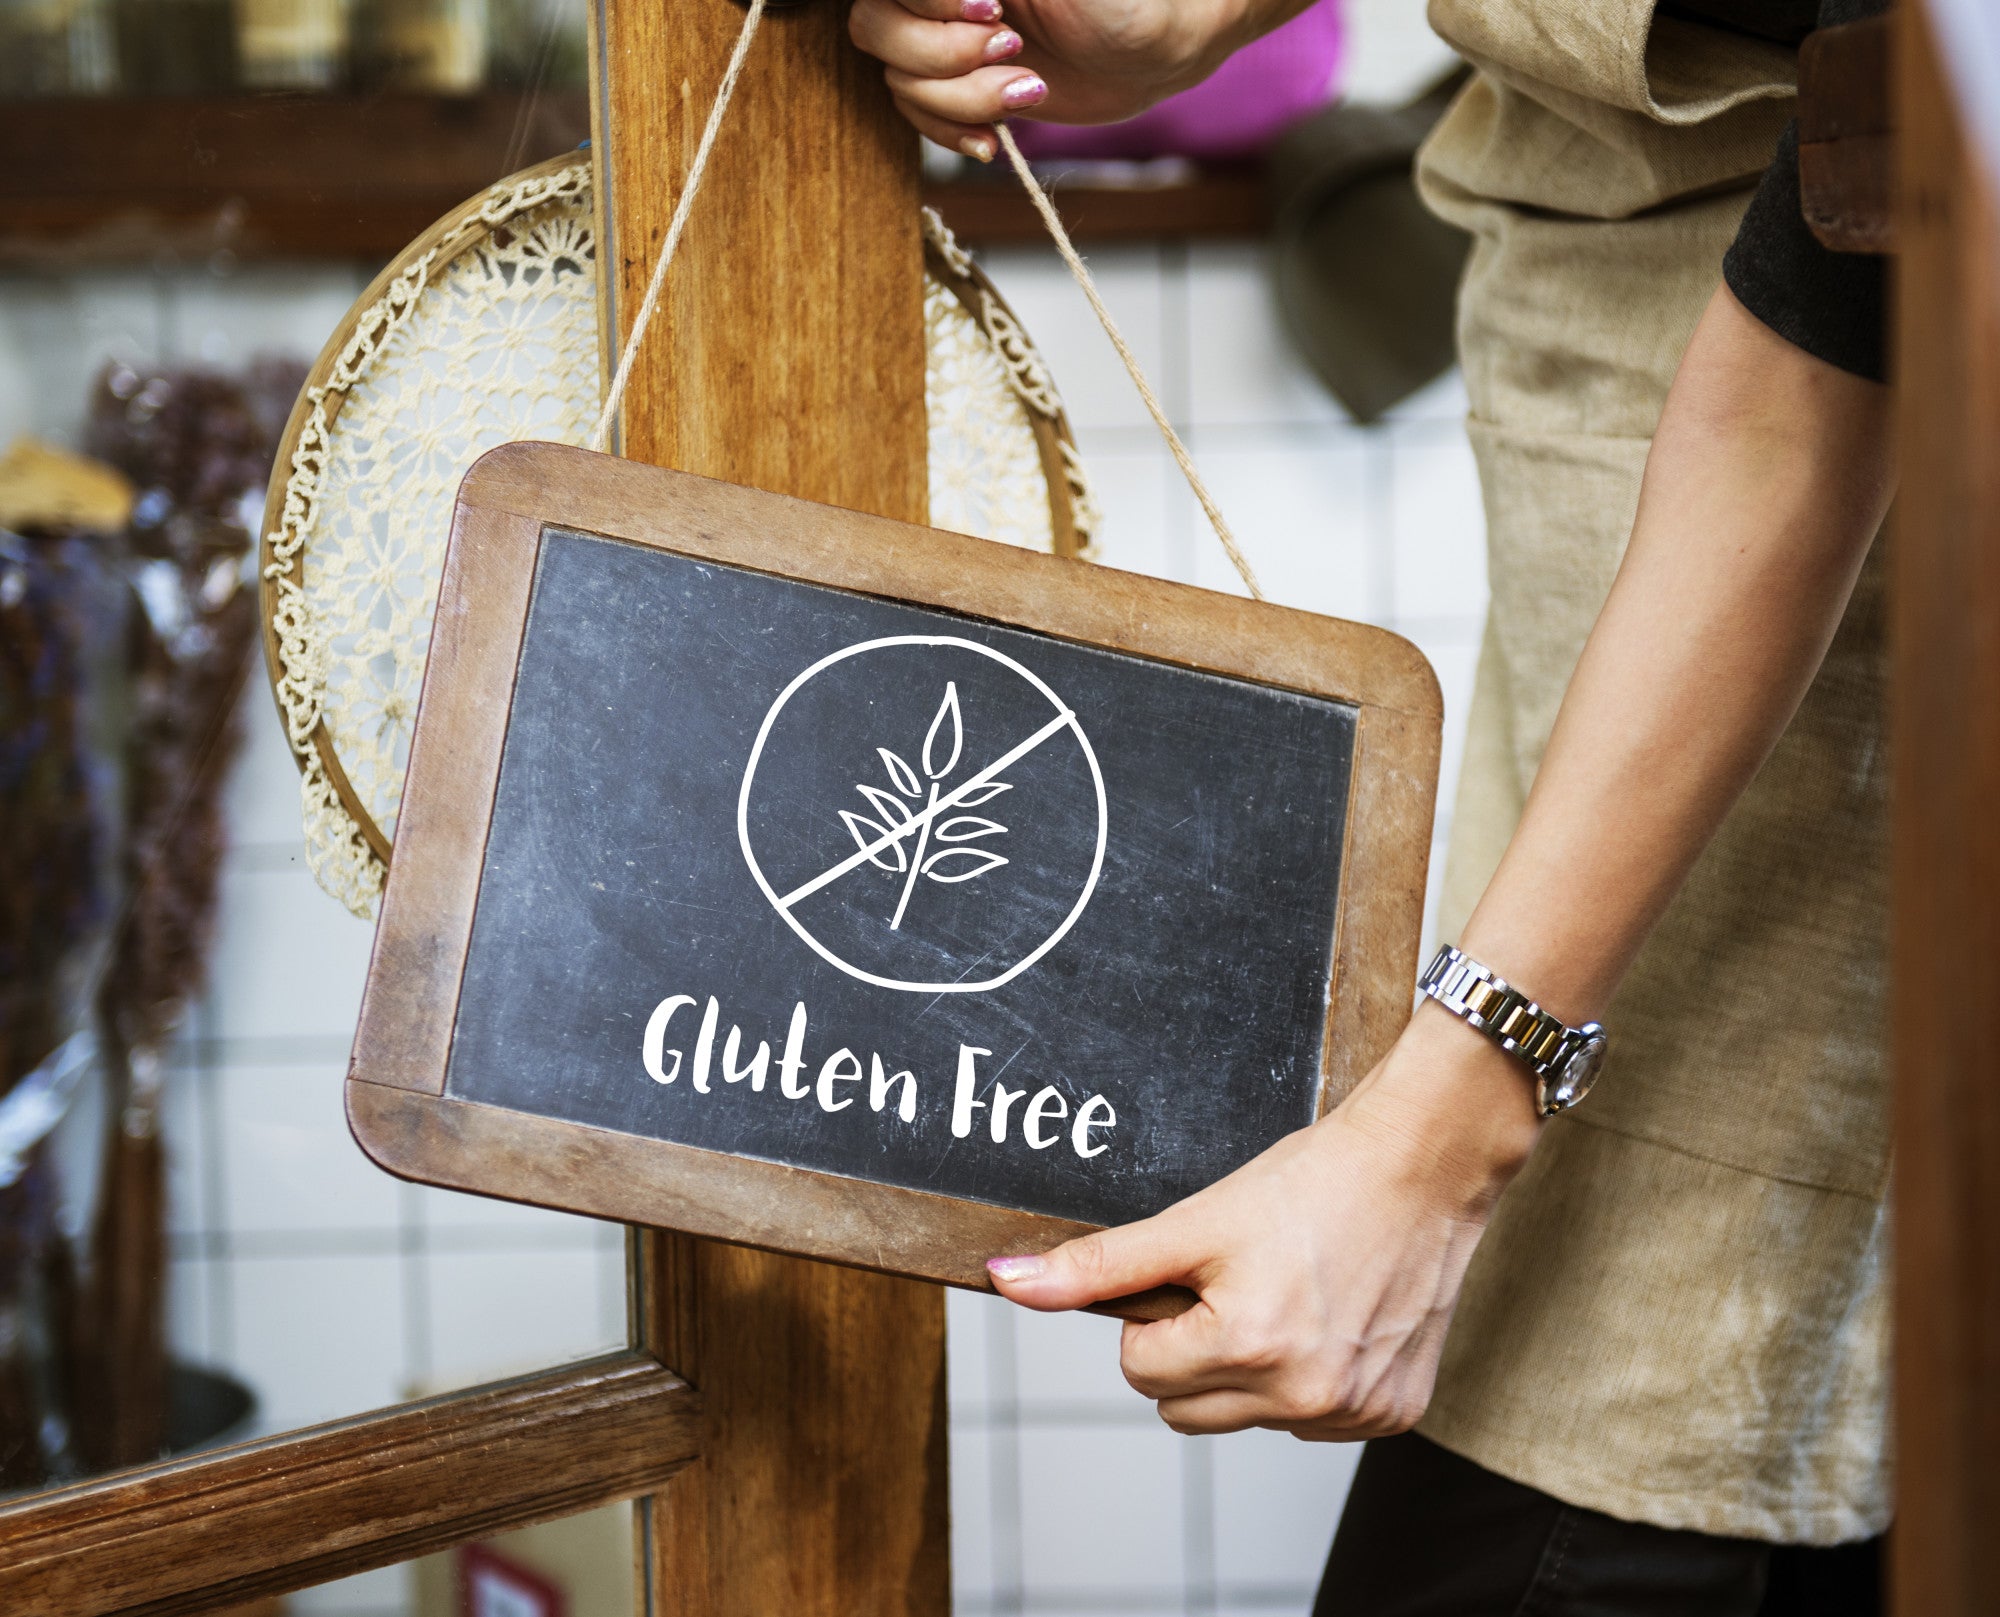 Gluten-Free Diet - What You Need to Know